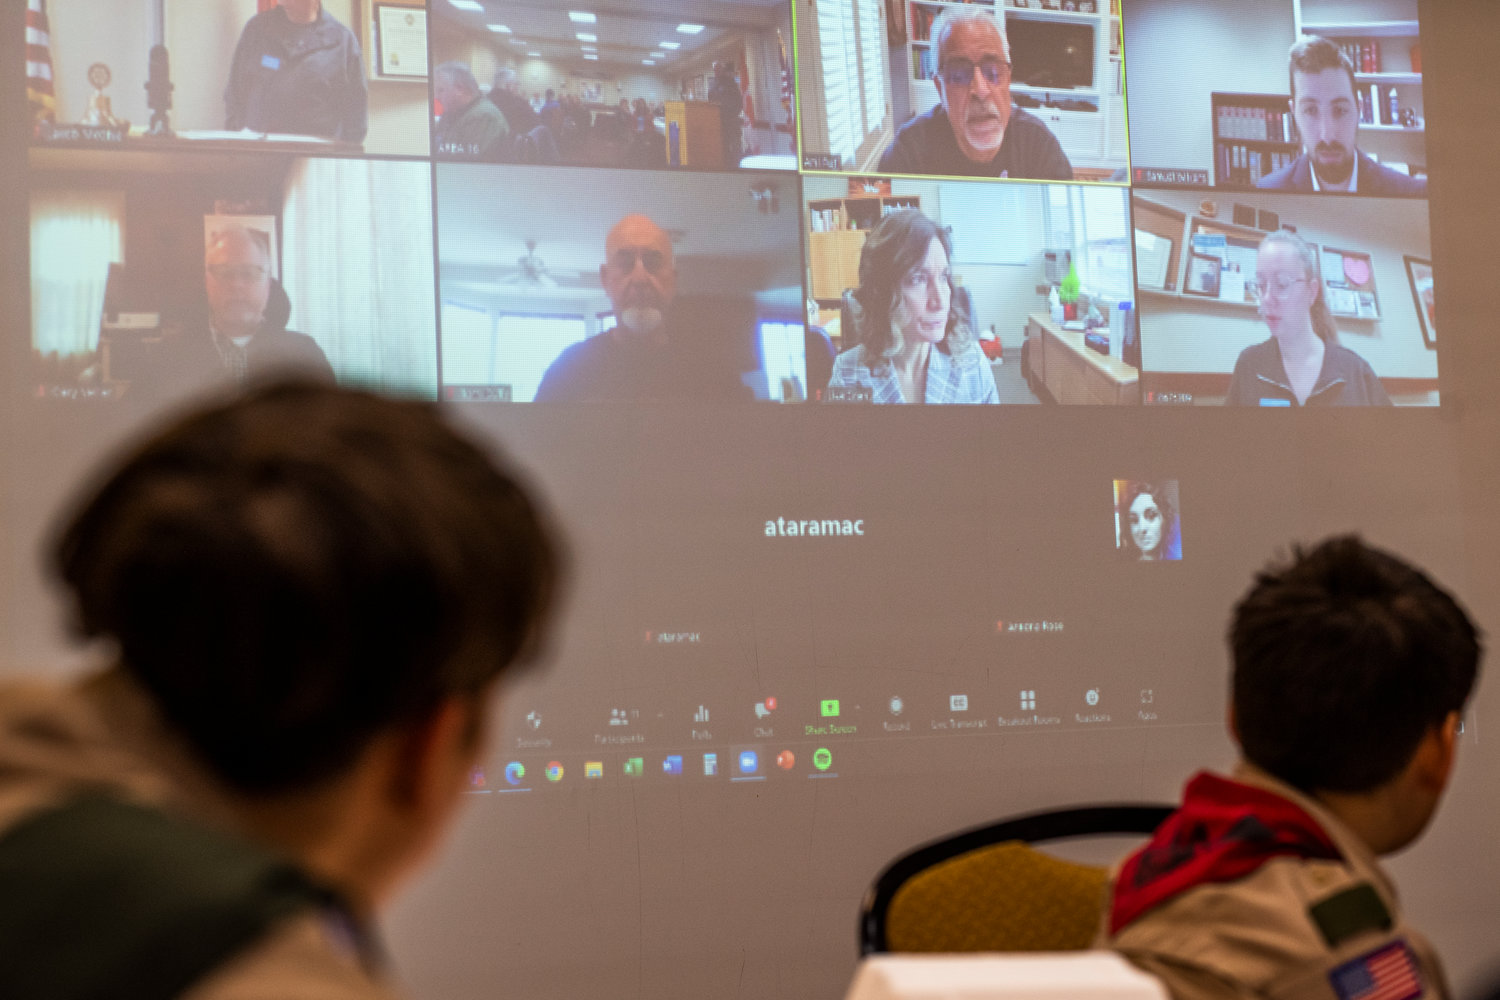 Anil Puri, of Centralia, speaks via Zoom about Twin Cities Rotary Club assistance to Ukrainian refugees in Poland during a meeting at the Holiday Inn Express in Chehalis Friday morning.